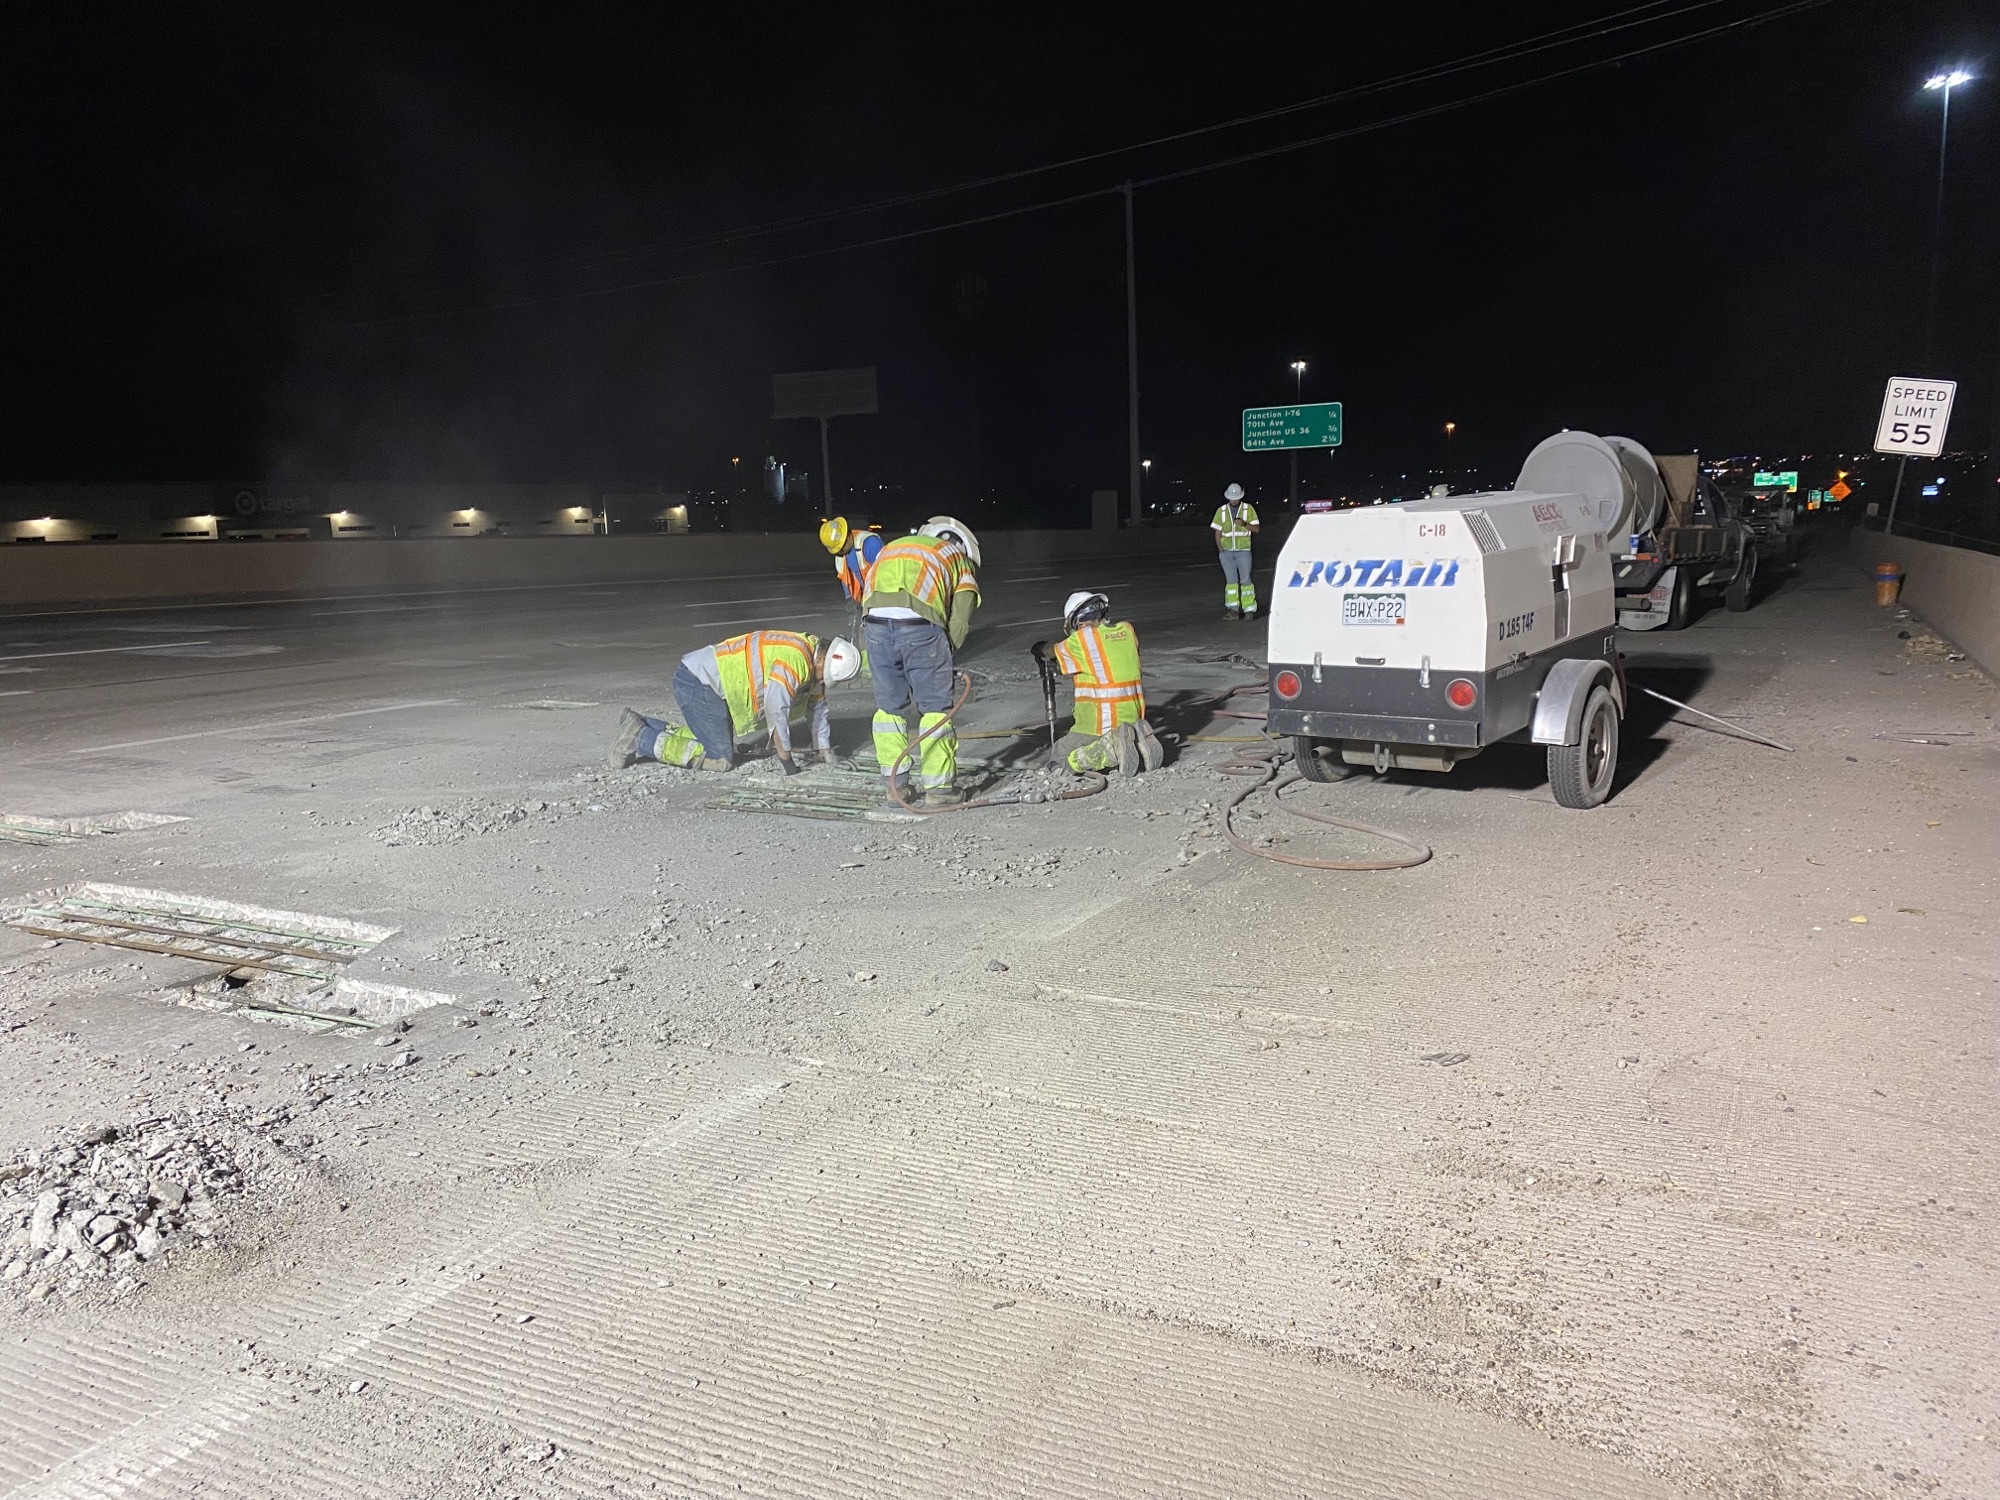 Crews performing bridge deck repairs on the steel superstructure of northbound I-25 at the 62nd Avenue bridge to ensure vehicular loads are supported. detail image